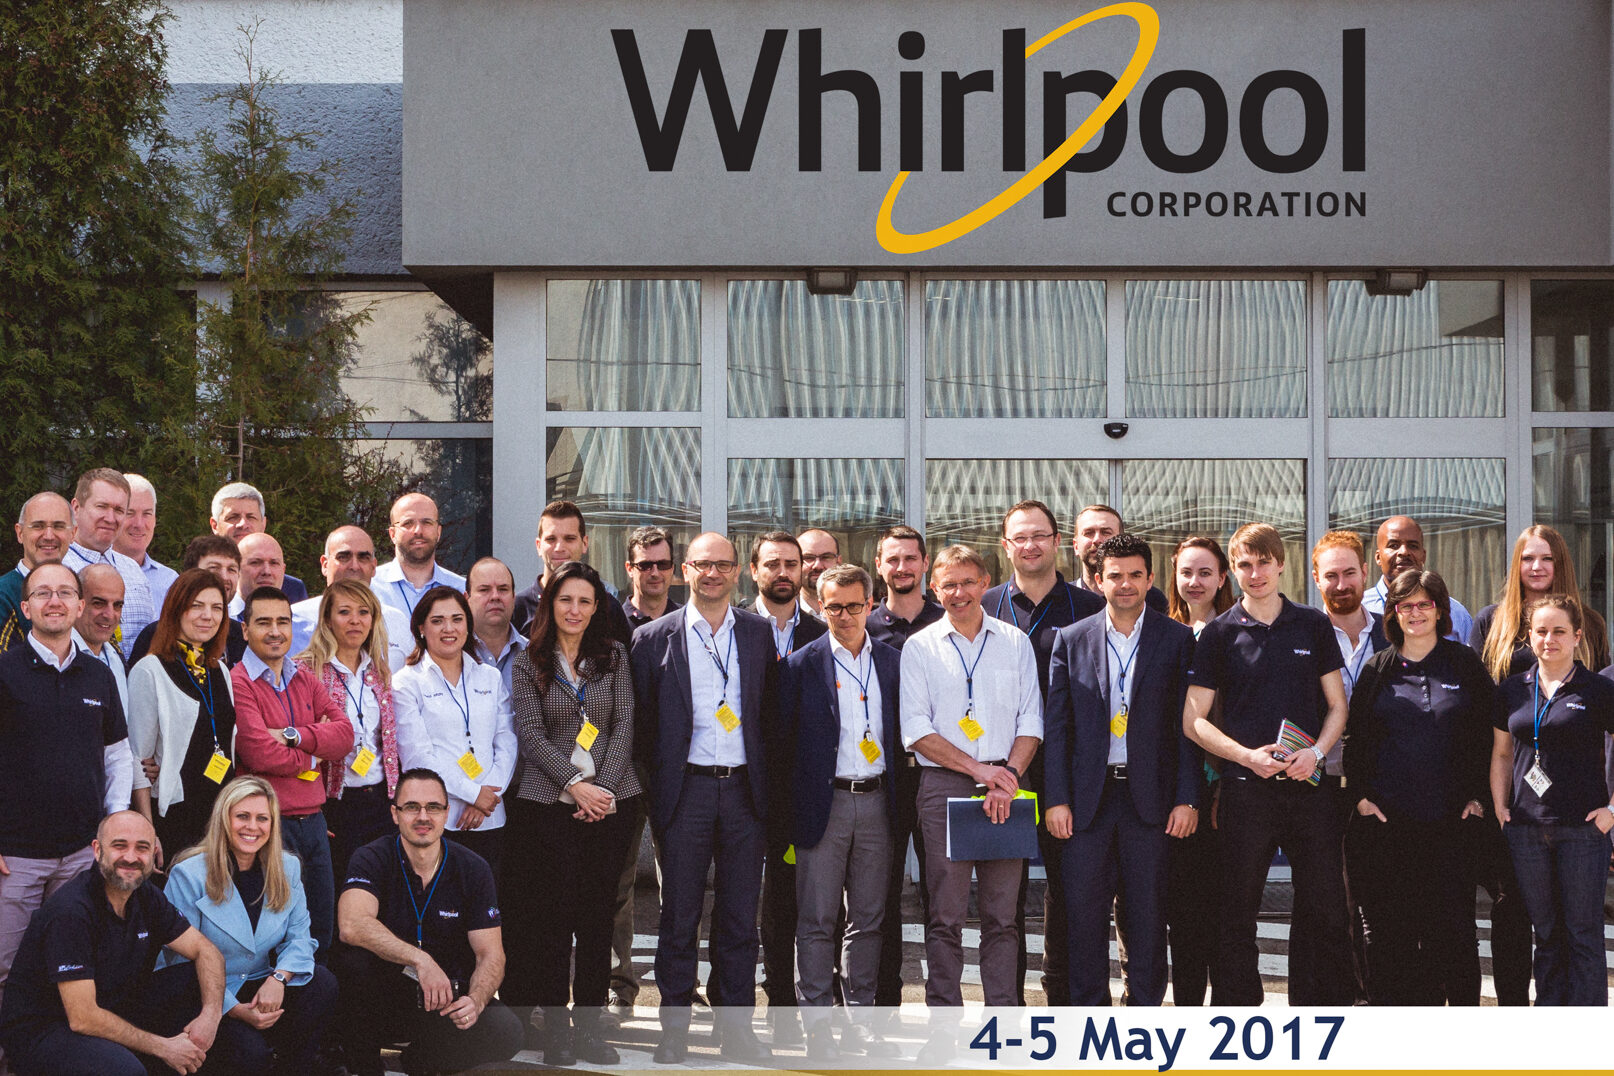 Kaizen Tracker successfully implemented in Whirlpool Corporation